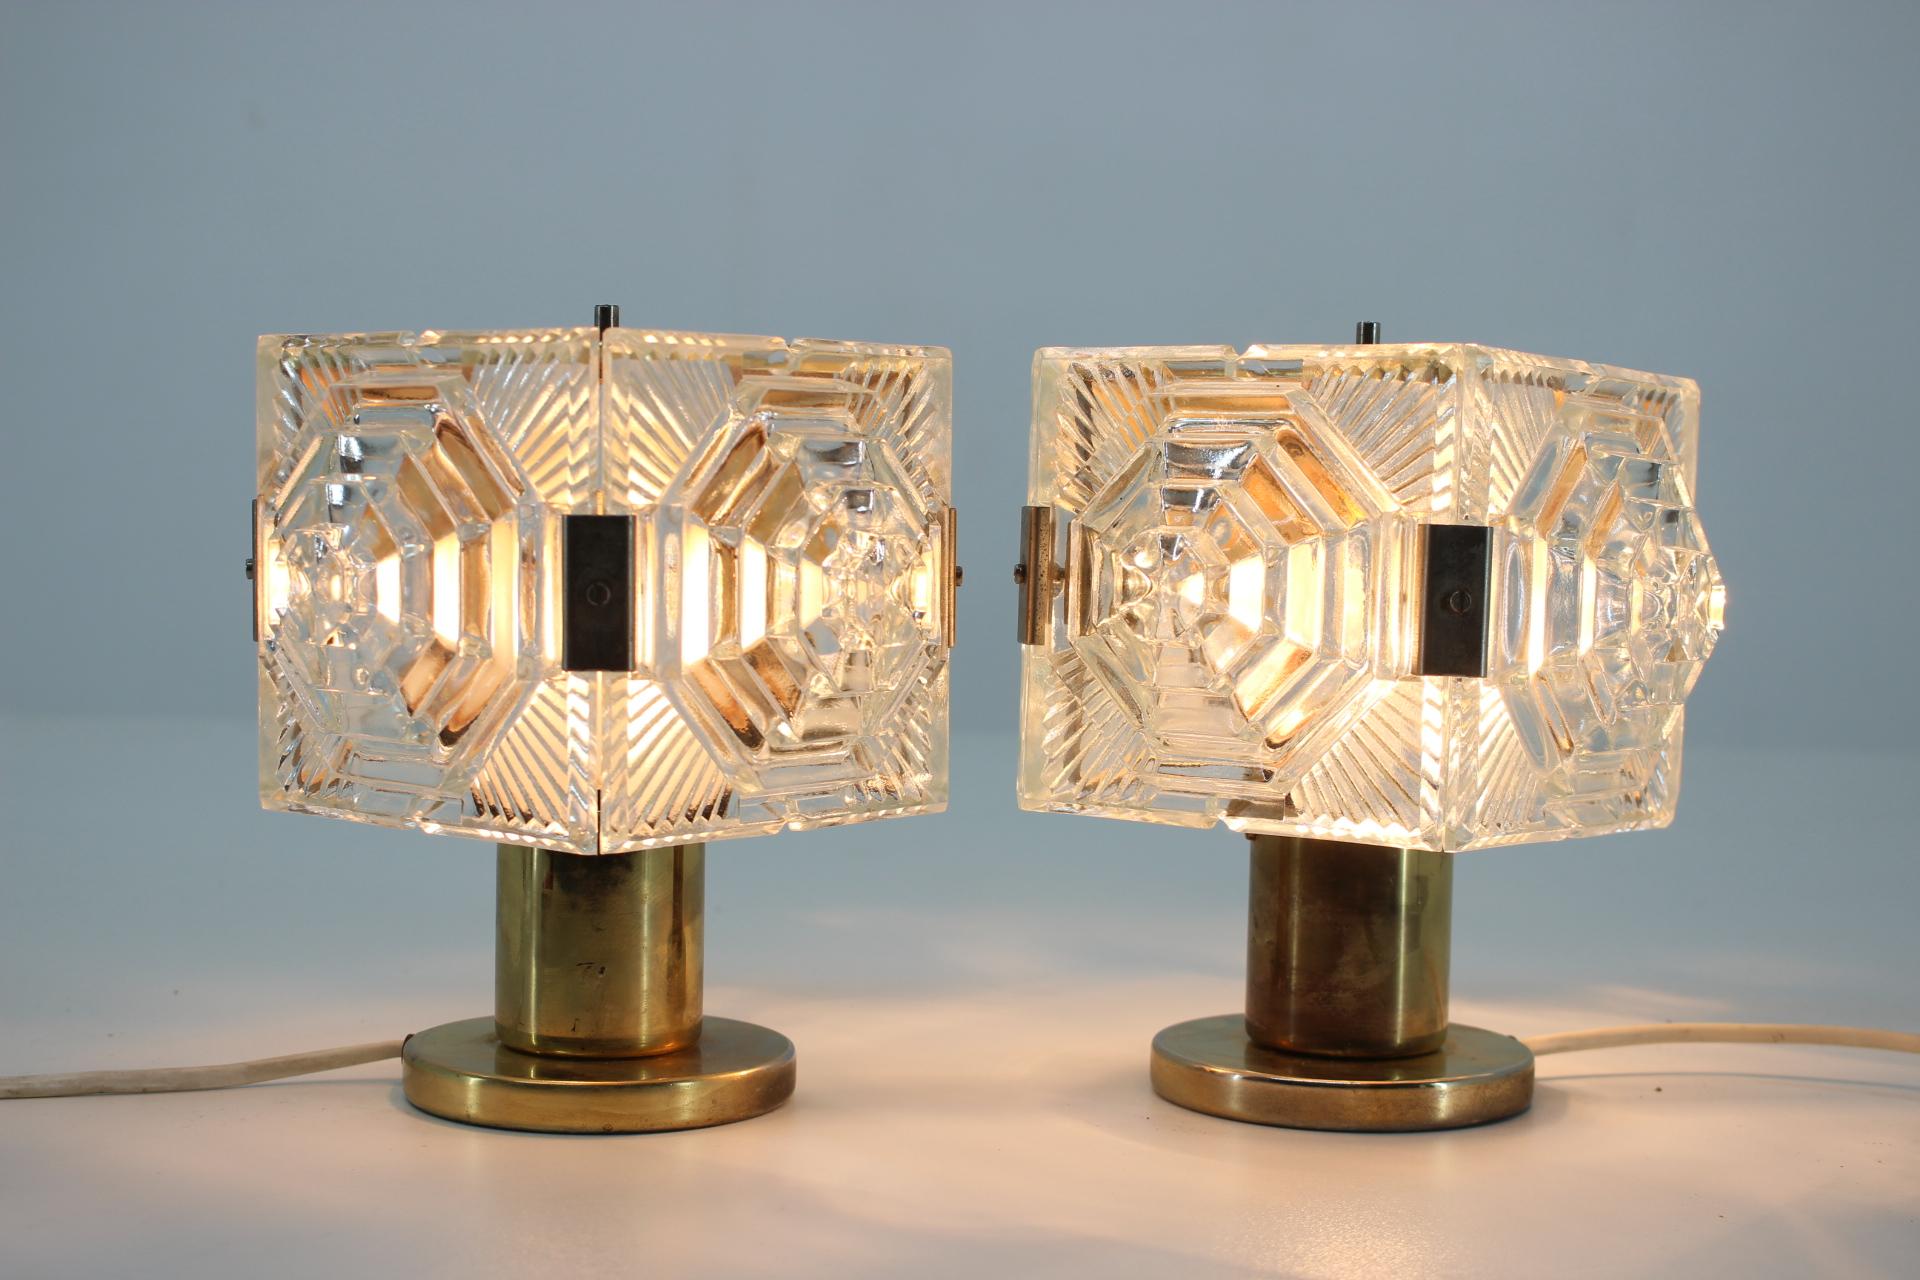 Czech Pair of Midcentury Glass Design Table Lamps, 1970s